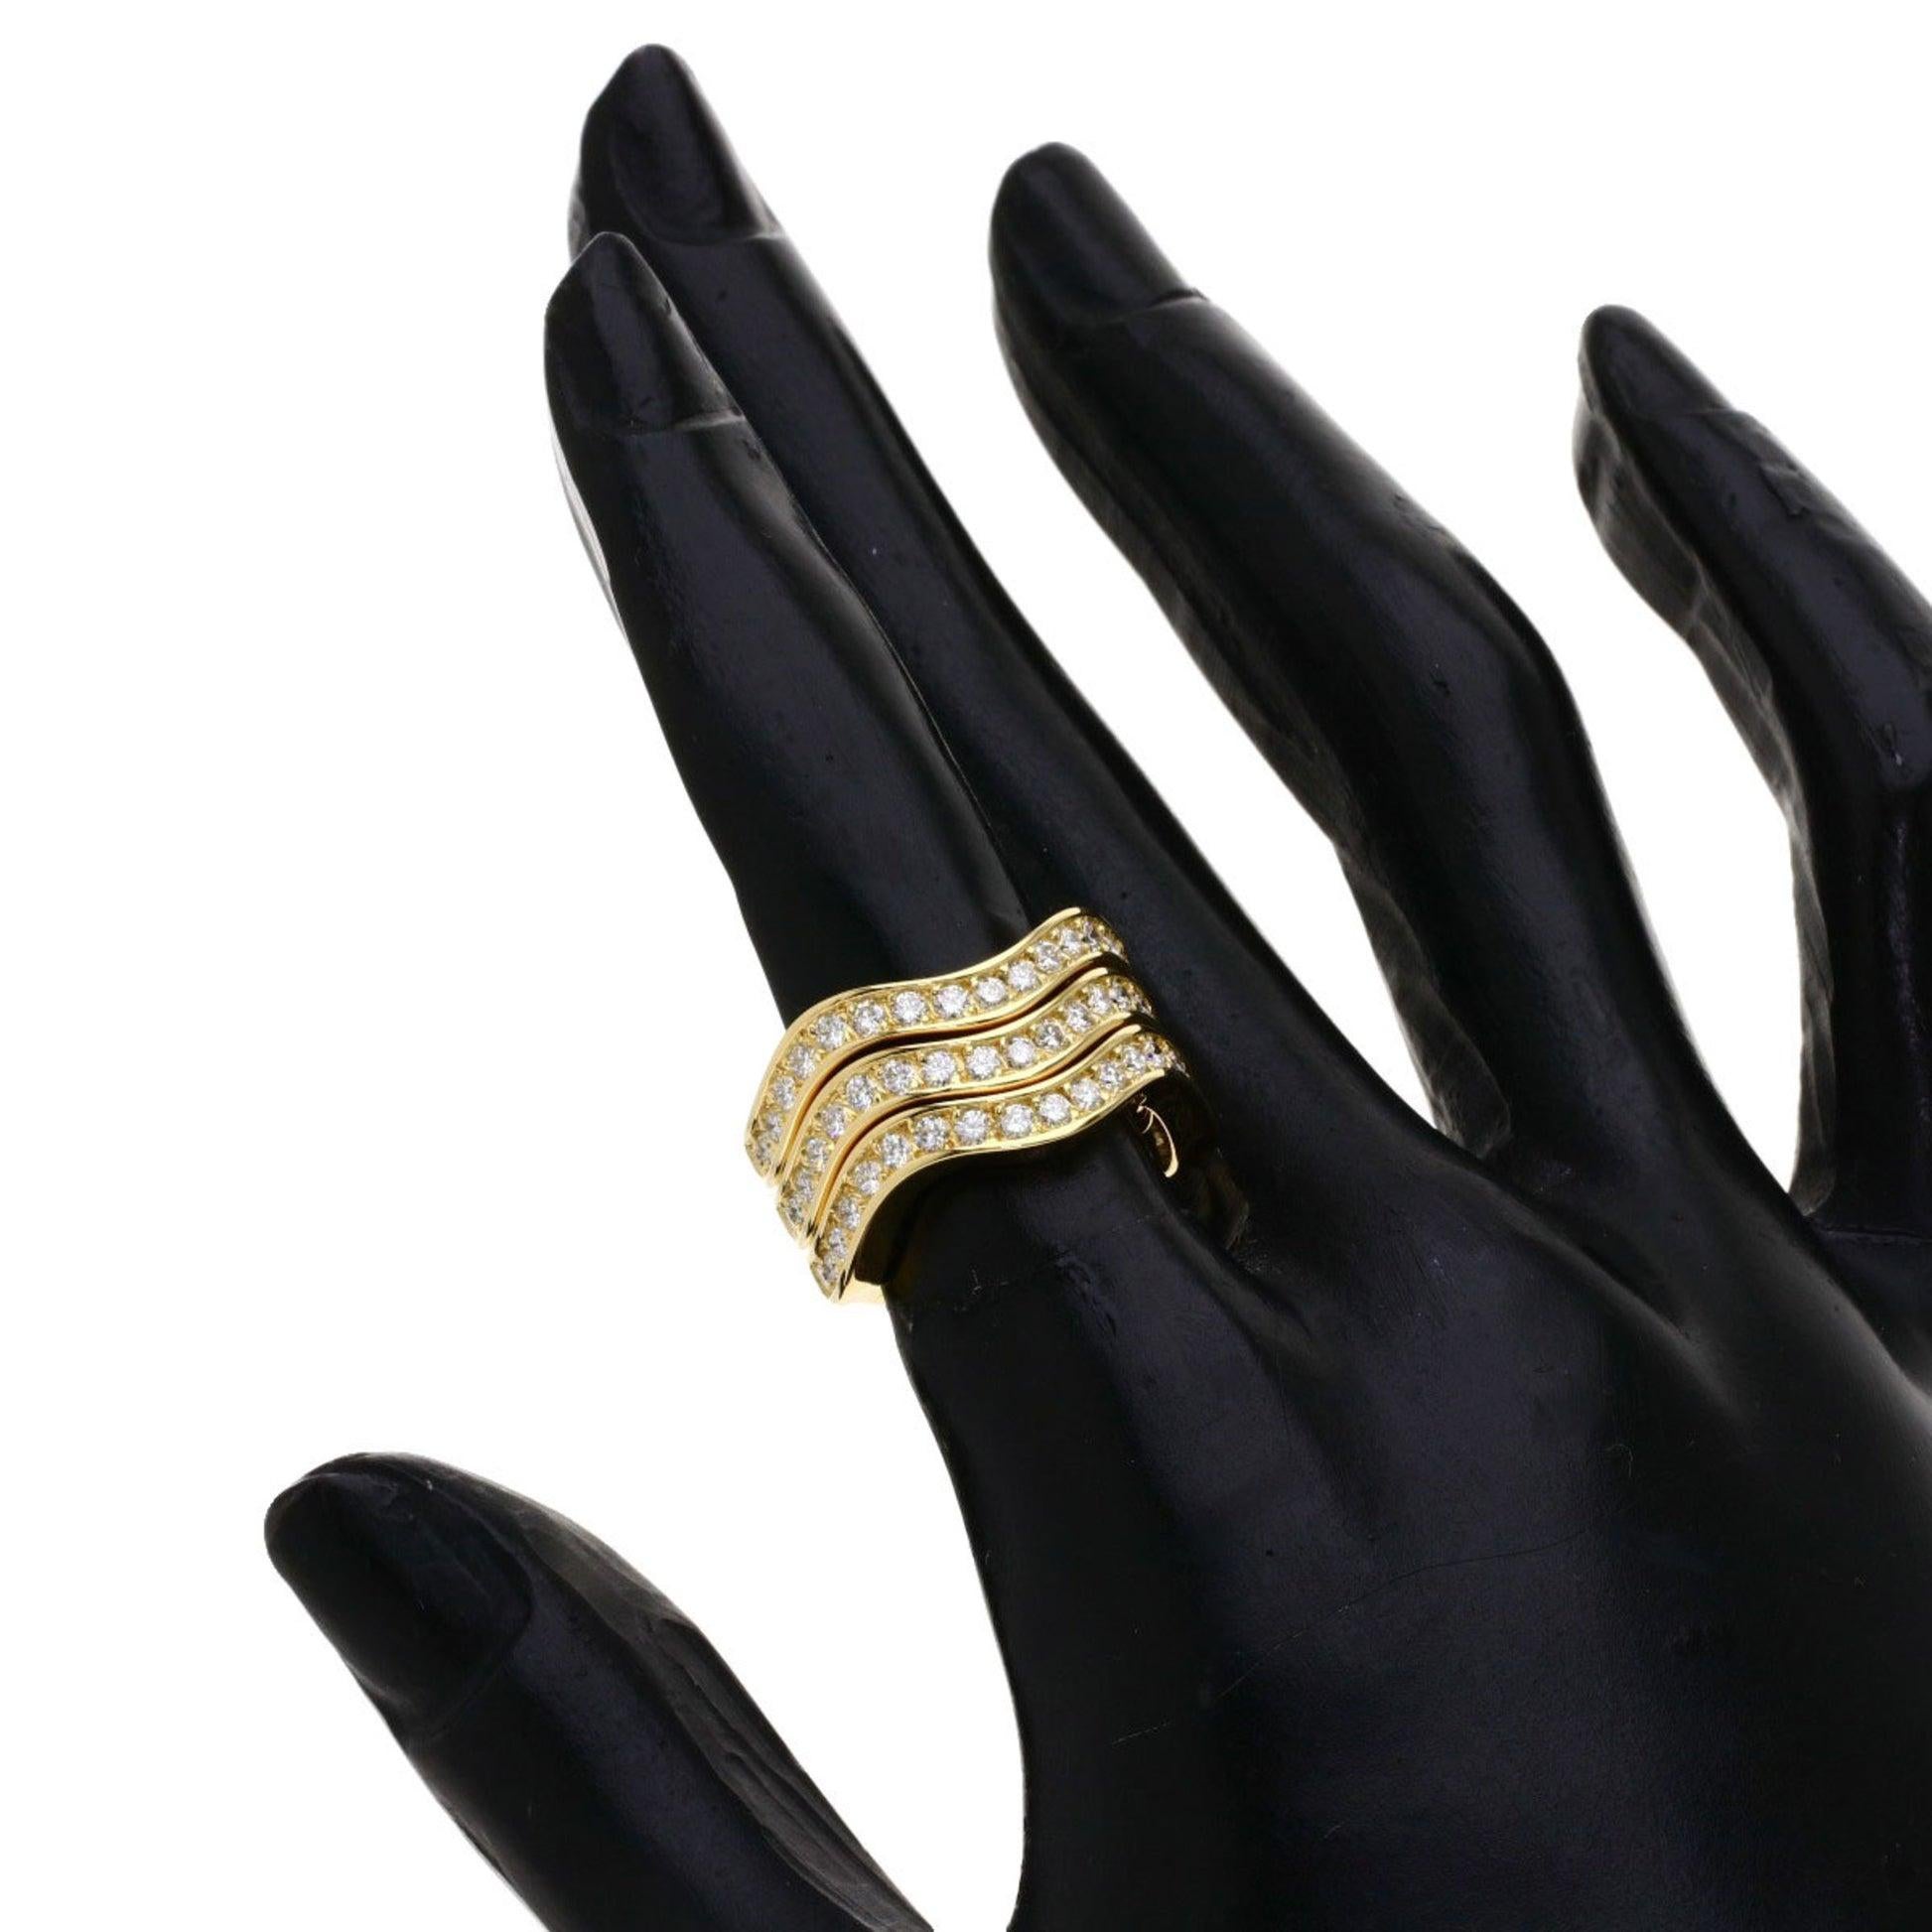 Cartier Neptune Diamond Triple Rings in 18K Yellow Gold

Additional Information:
Brand: Cartier
Gender: Women
Gemstone: Diamond
Material: Yellow gold (18K)
Ring size (US): 4.5-5
Condition: Good
Condition details: The item has been used and has some